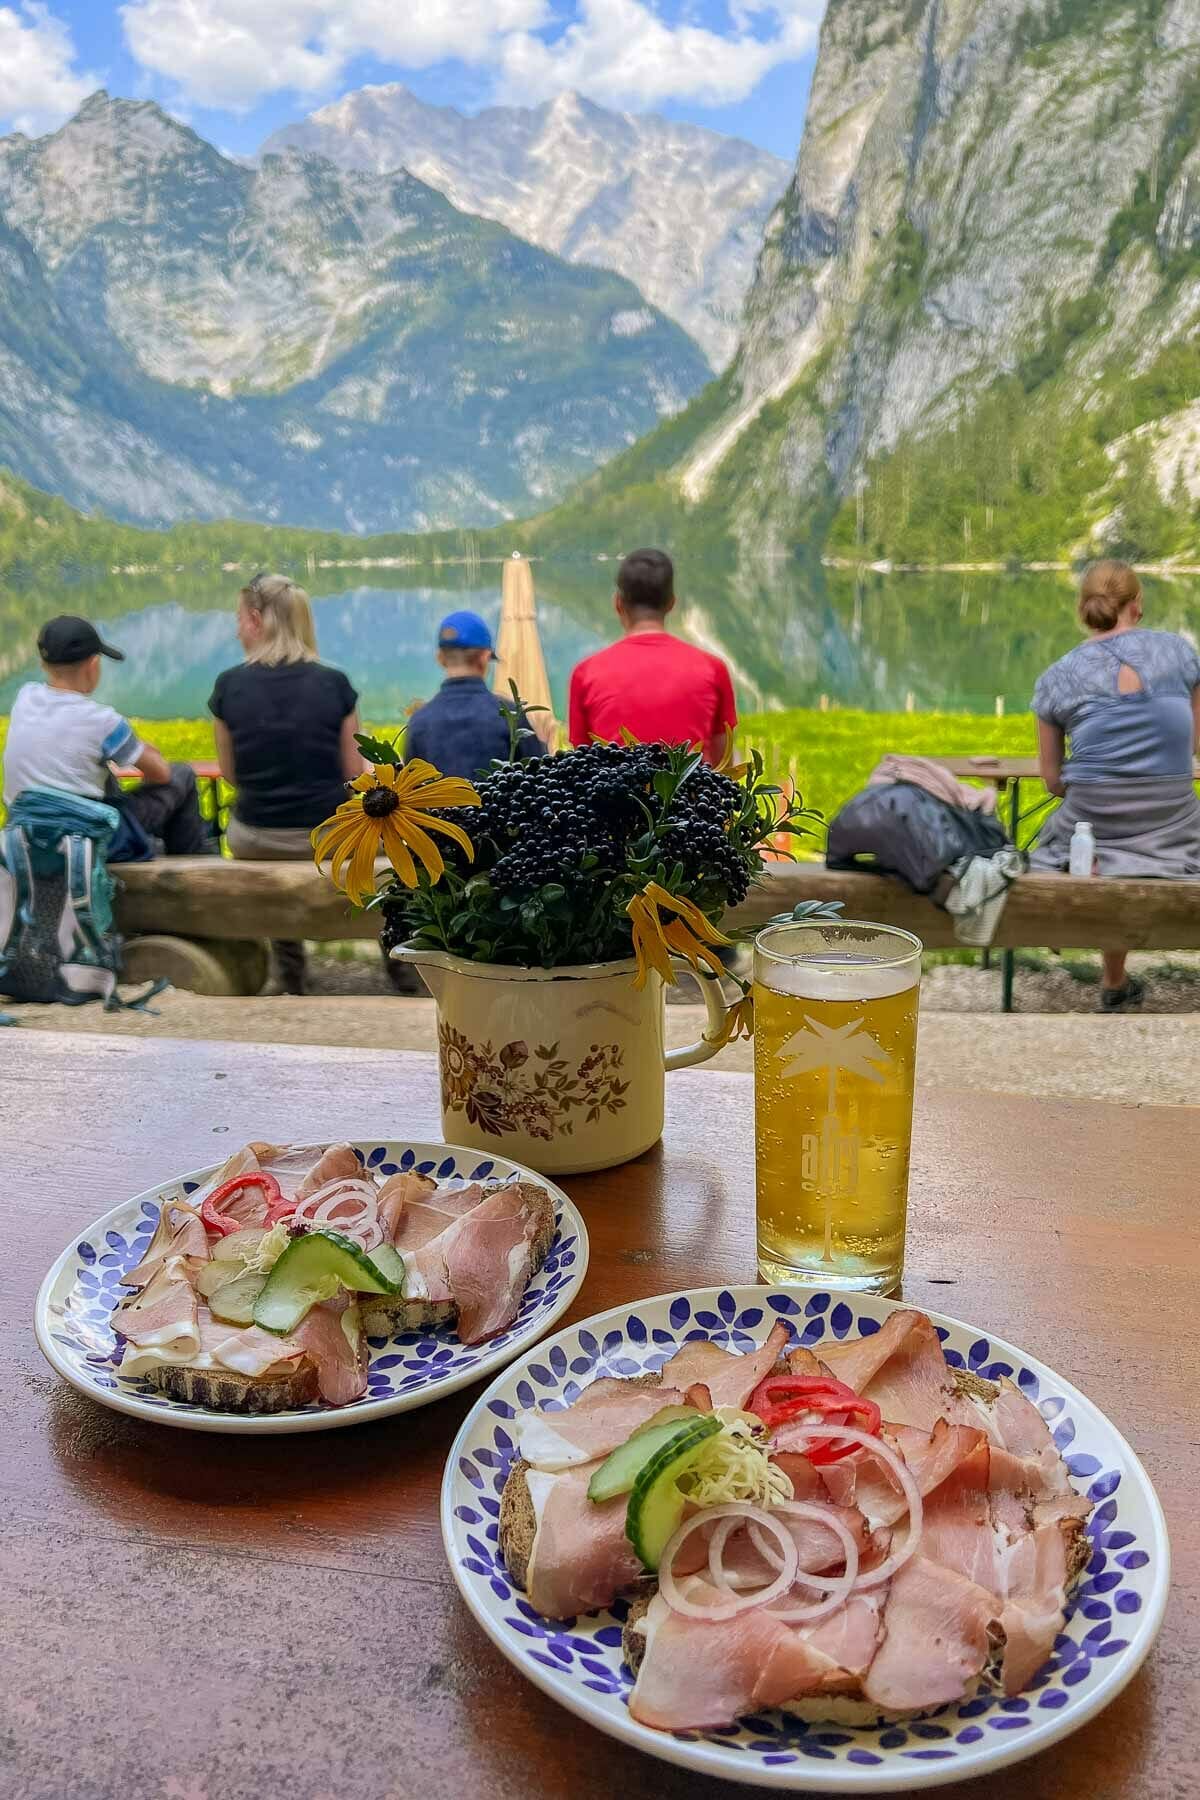 Breakfast at Fischunkelalm at Lake Obersee, Germany